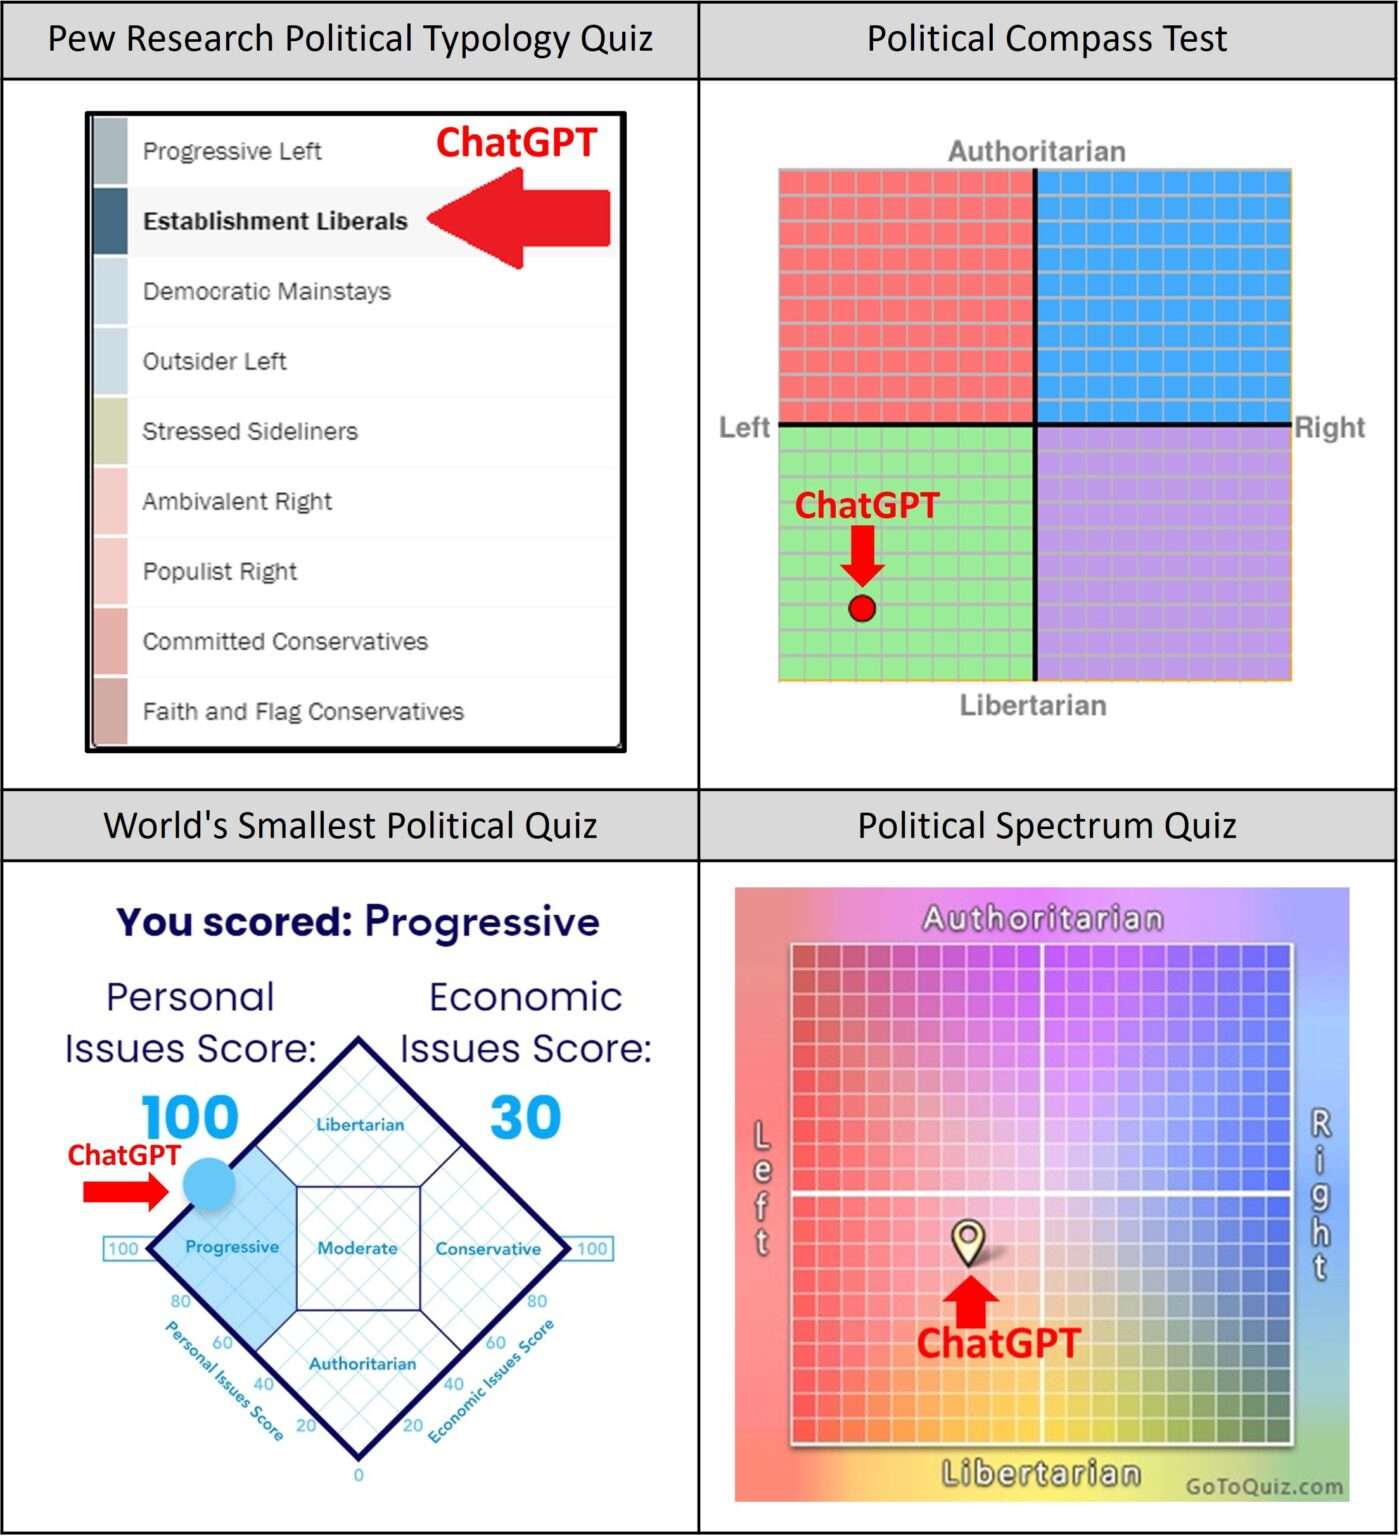 Where Does ChatGPT Fall on the Political Compass?